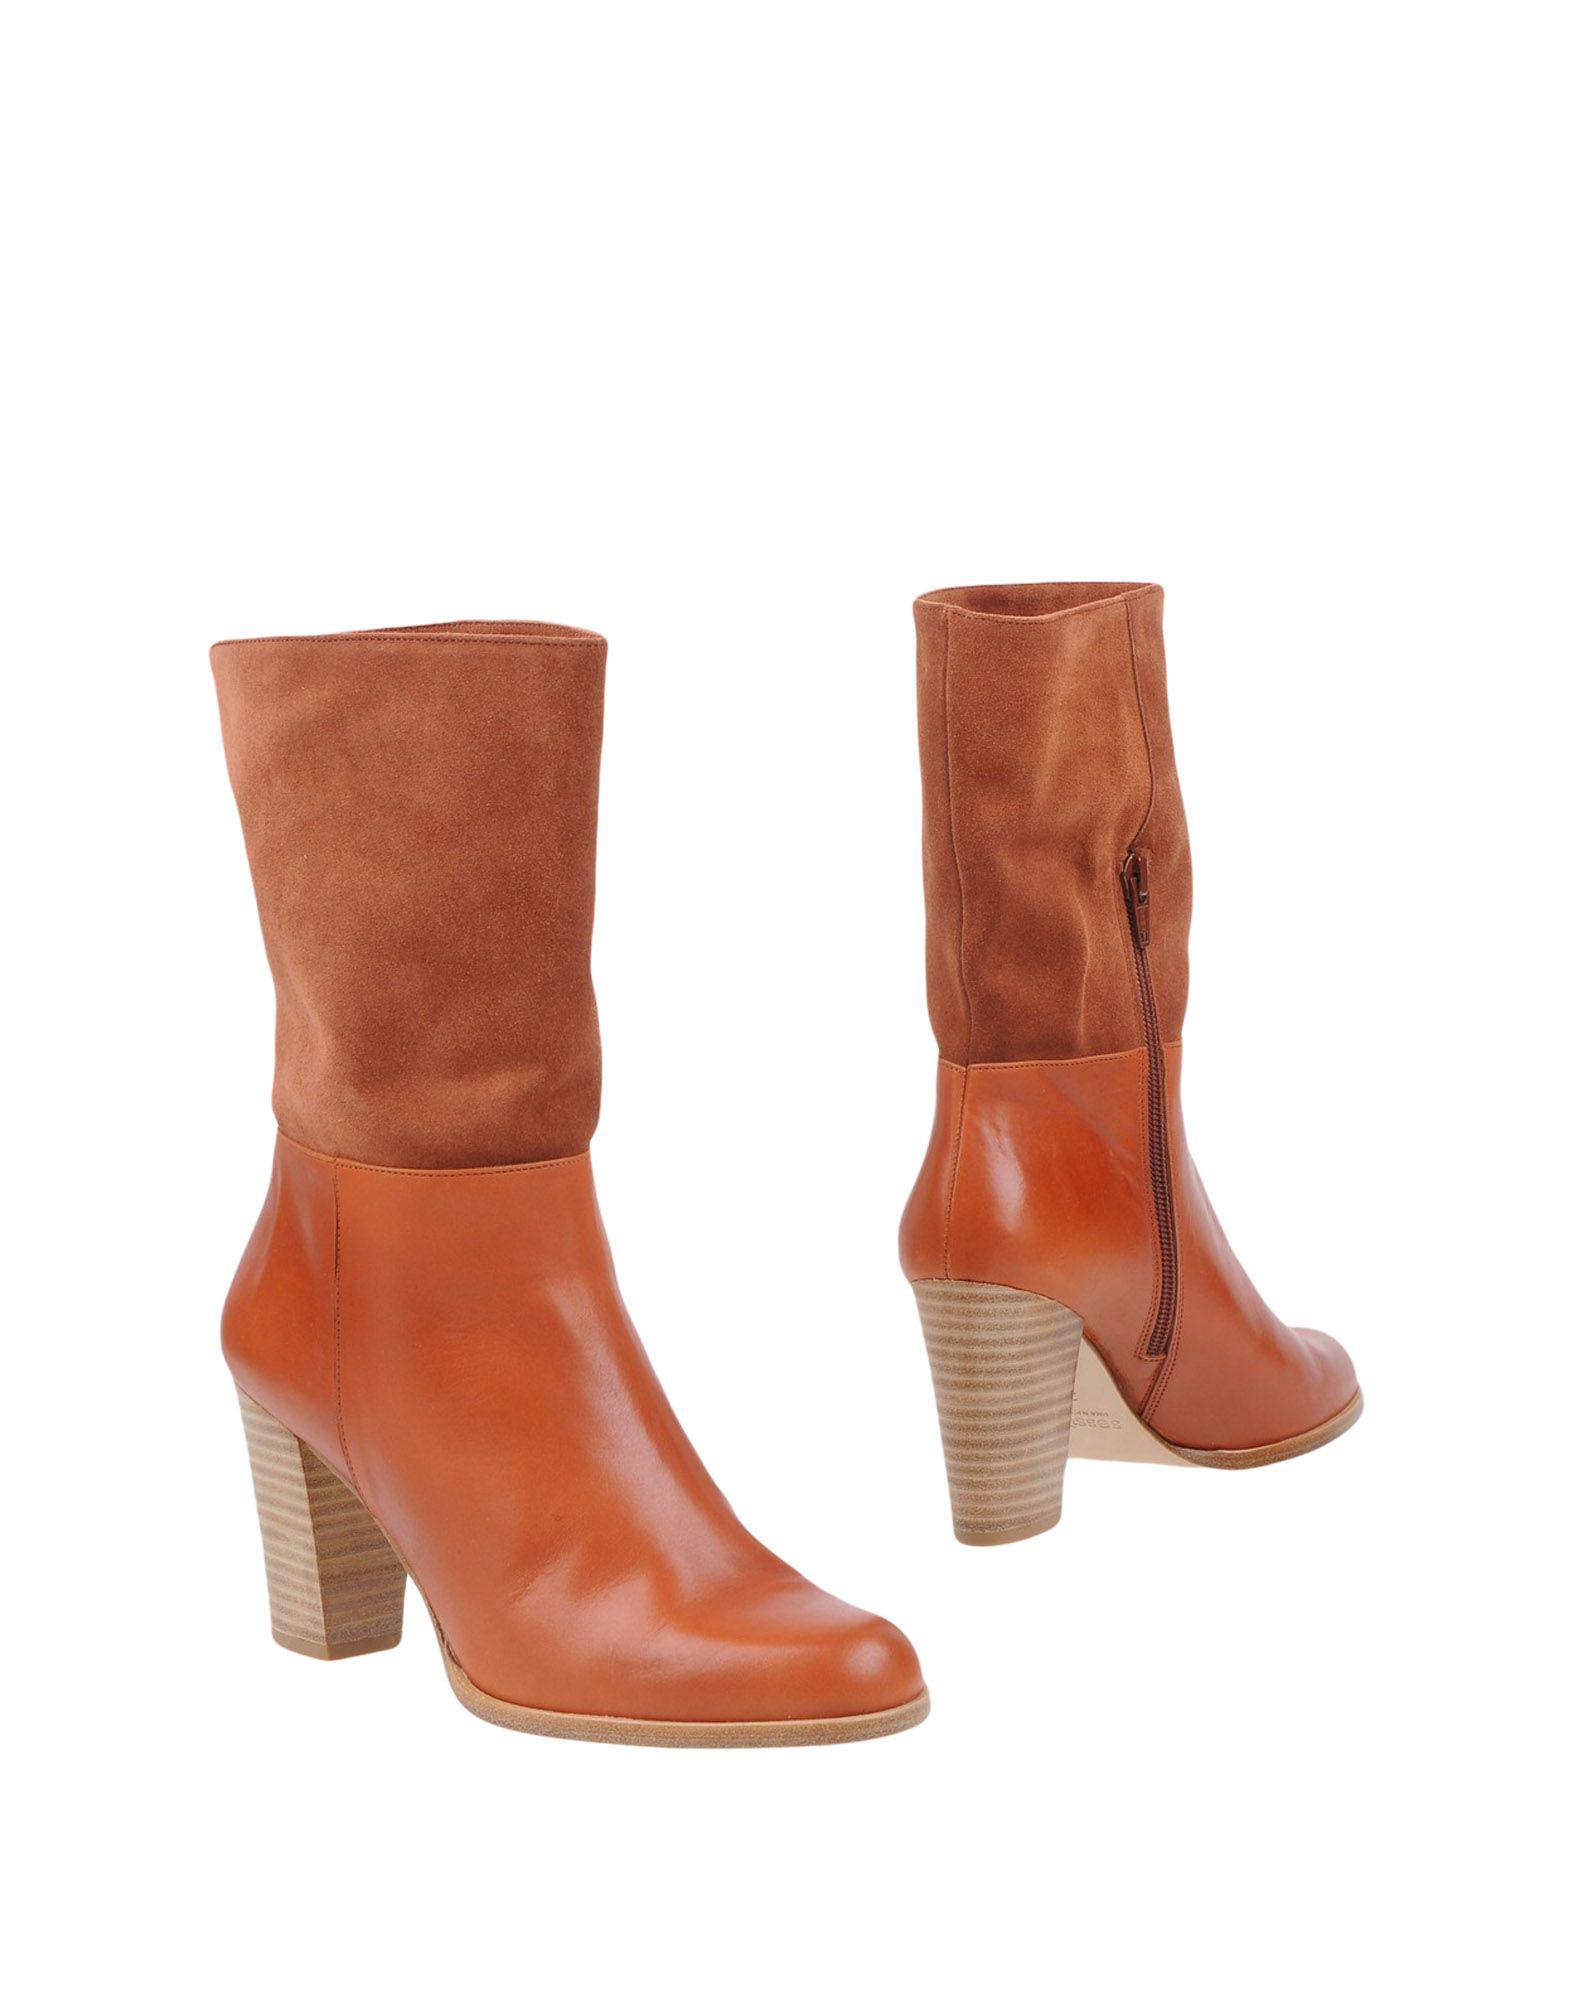 Sessun Leather Ankle Boots in Tan (Brown) - Lyst